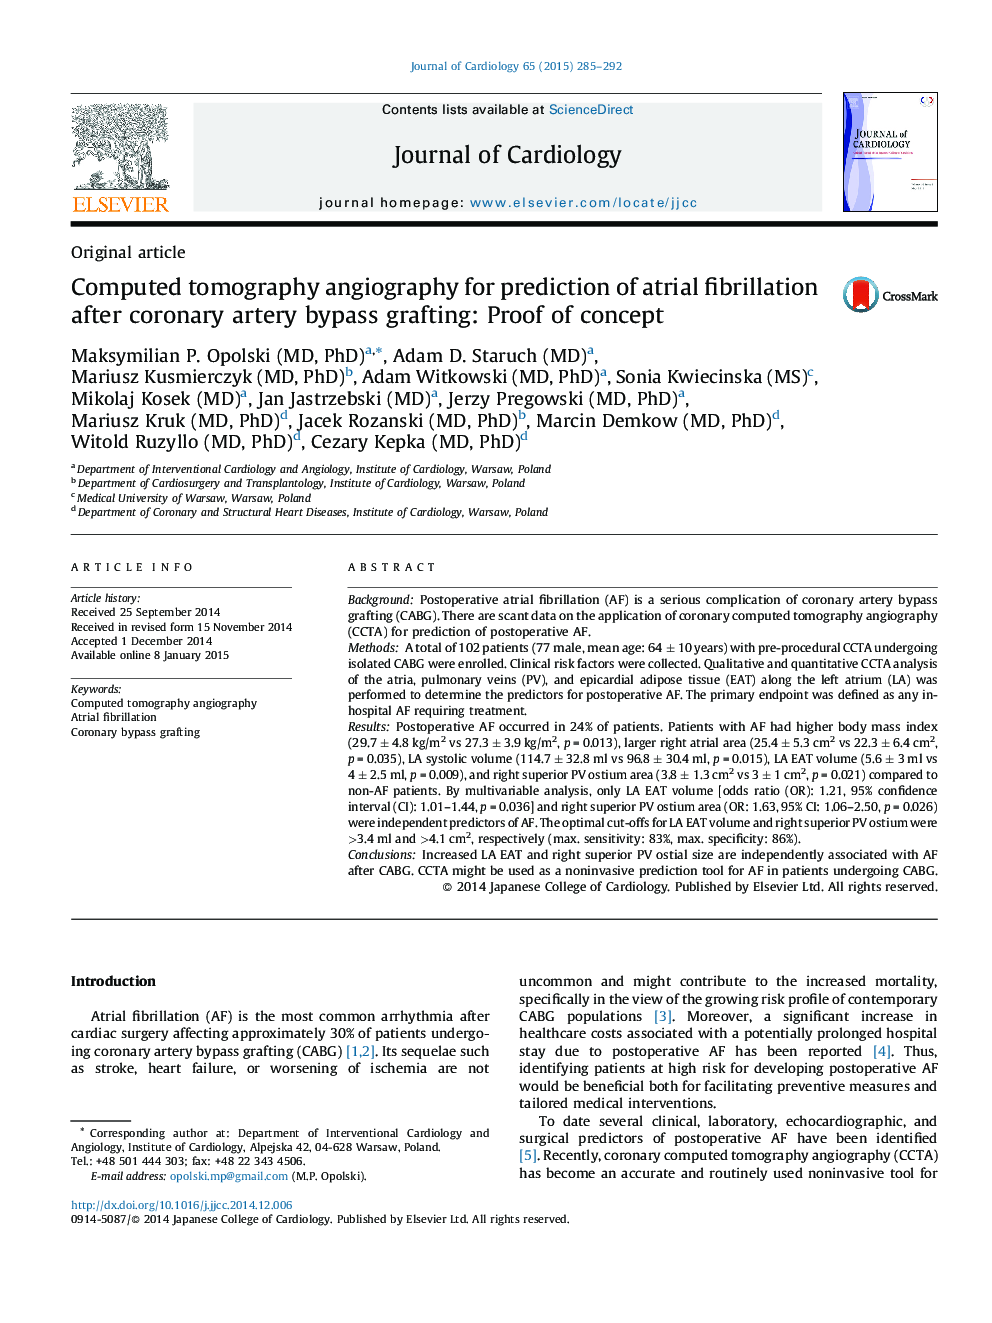 Computed tomography angiography for prediction of atrial fibrillation after coronary artery bypass grafting: Proof of concept